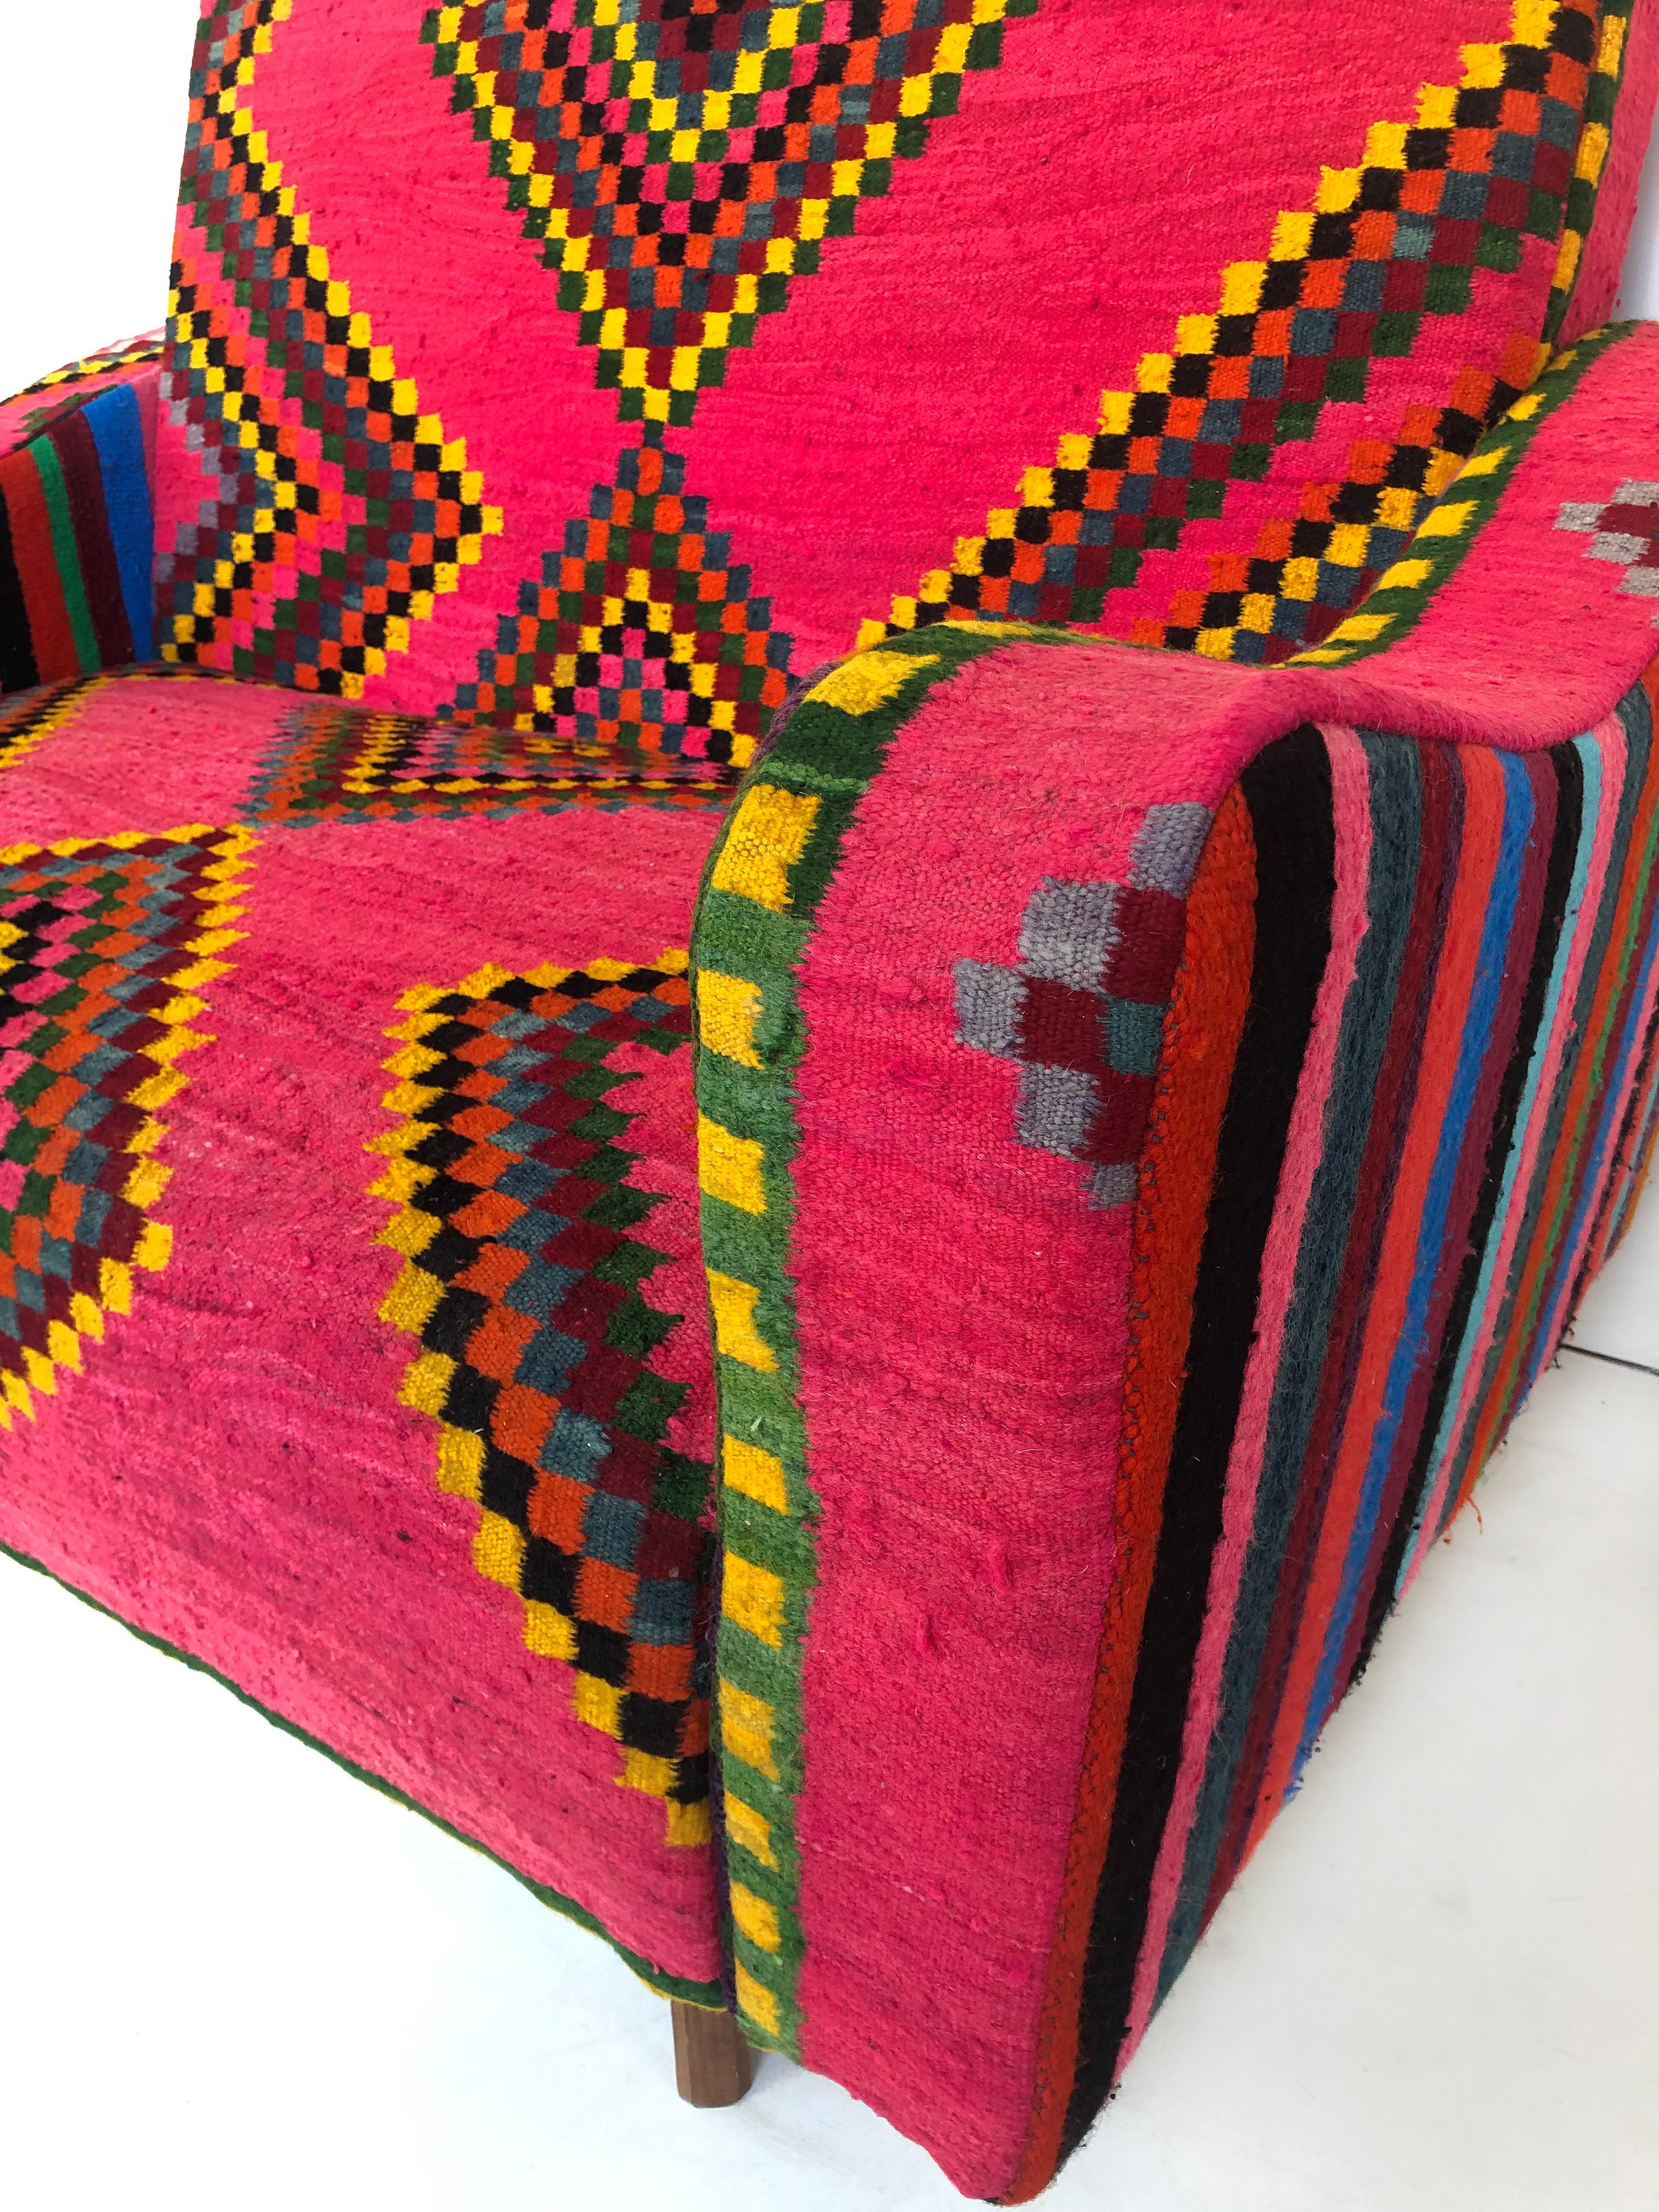 Tunisian 'North Africa' Woven Wool Textile Loveseat with Brightly Colored Fabric 1